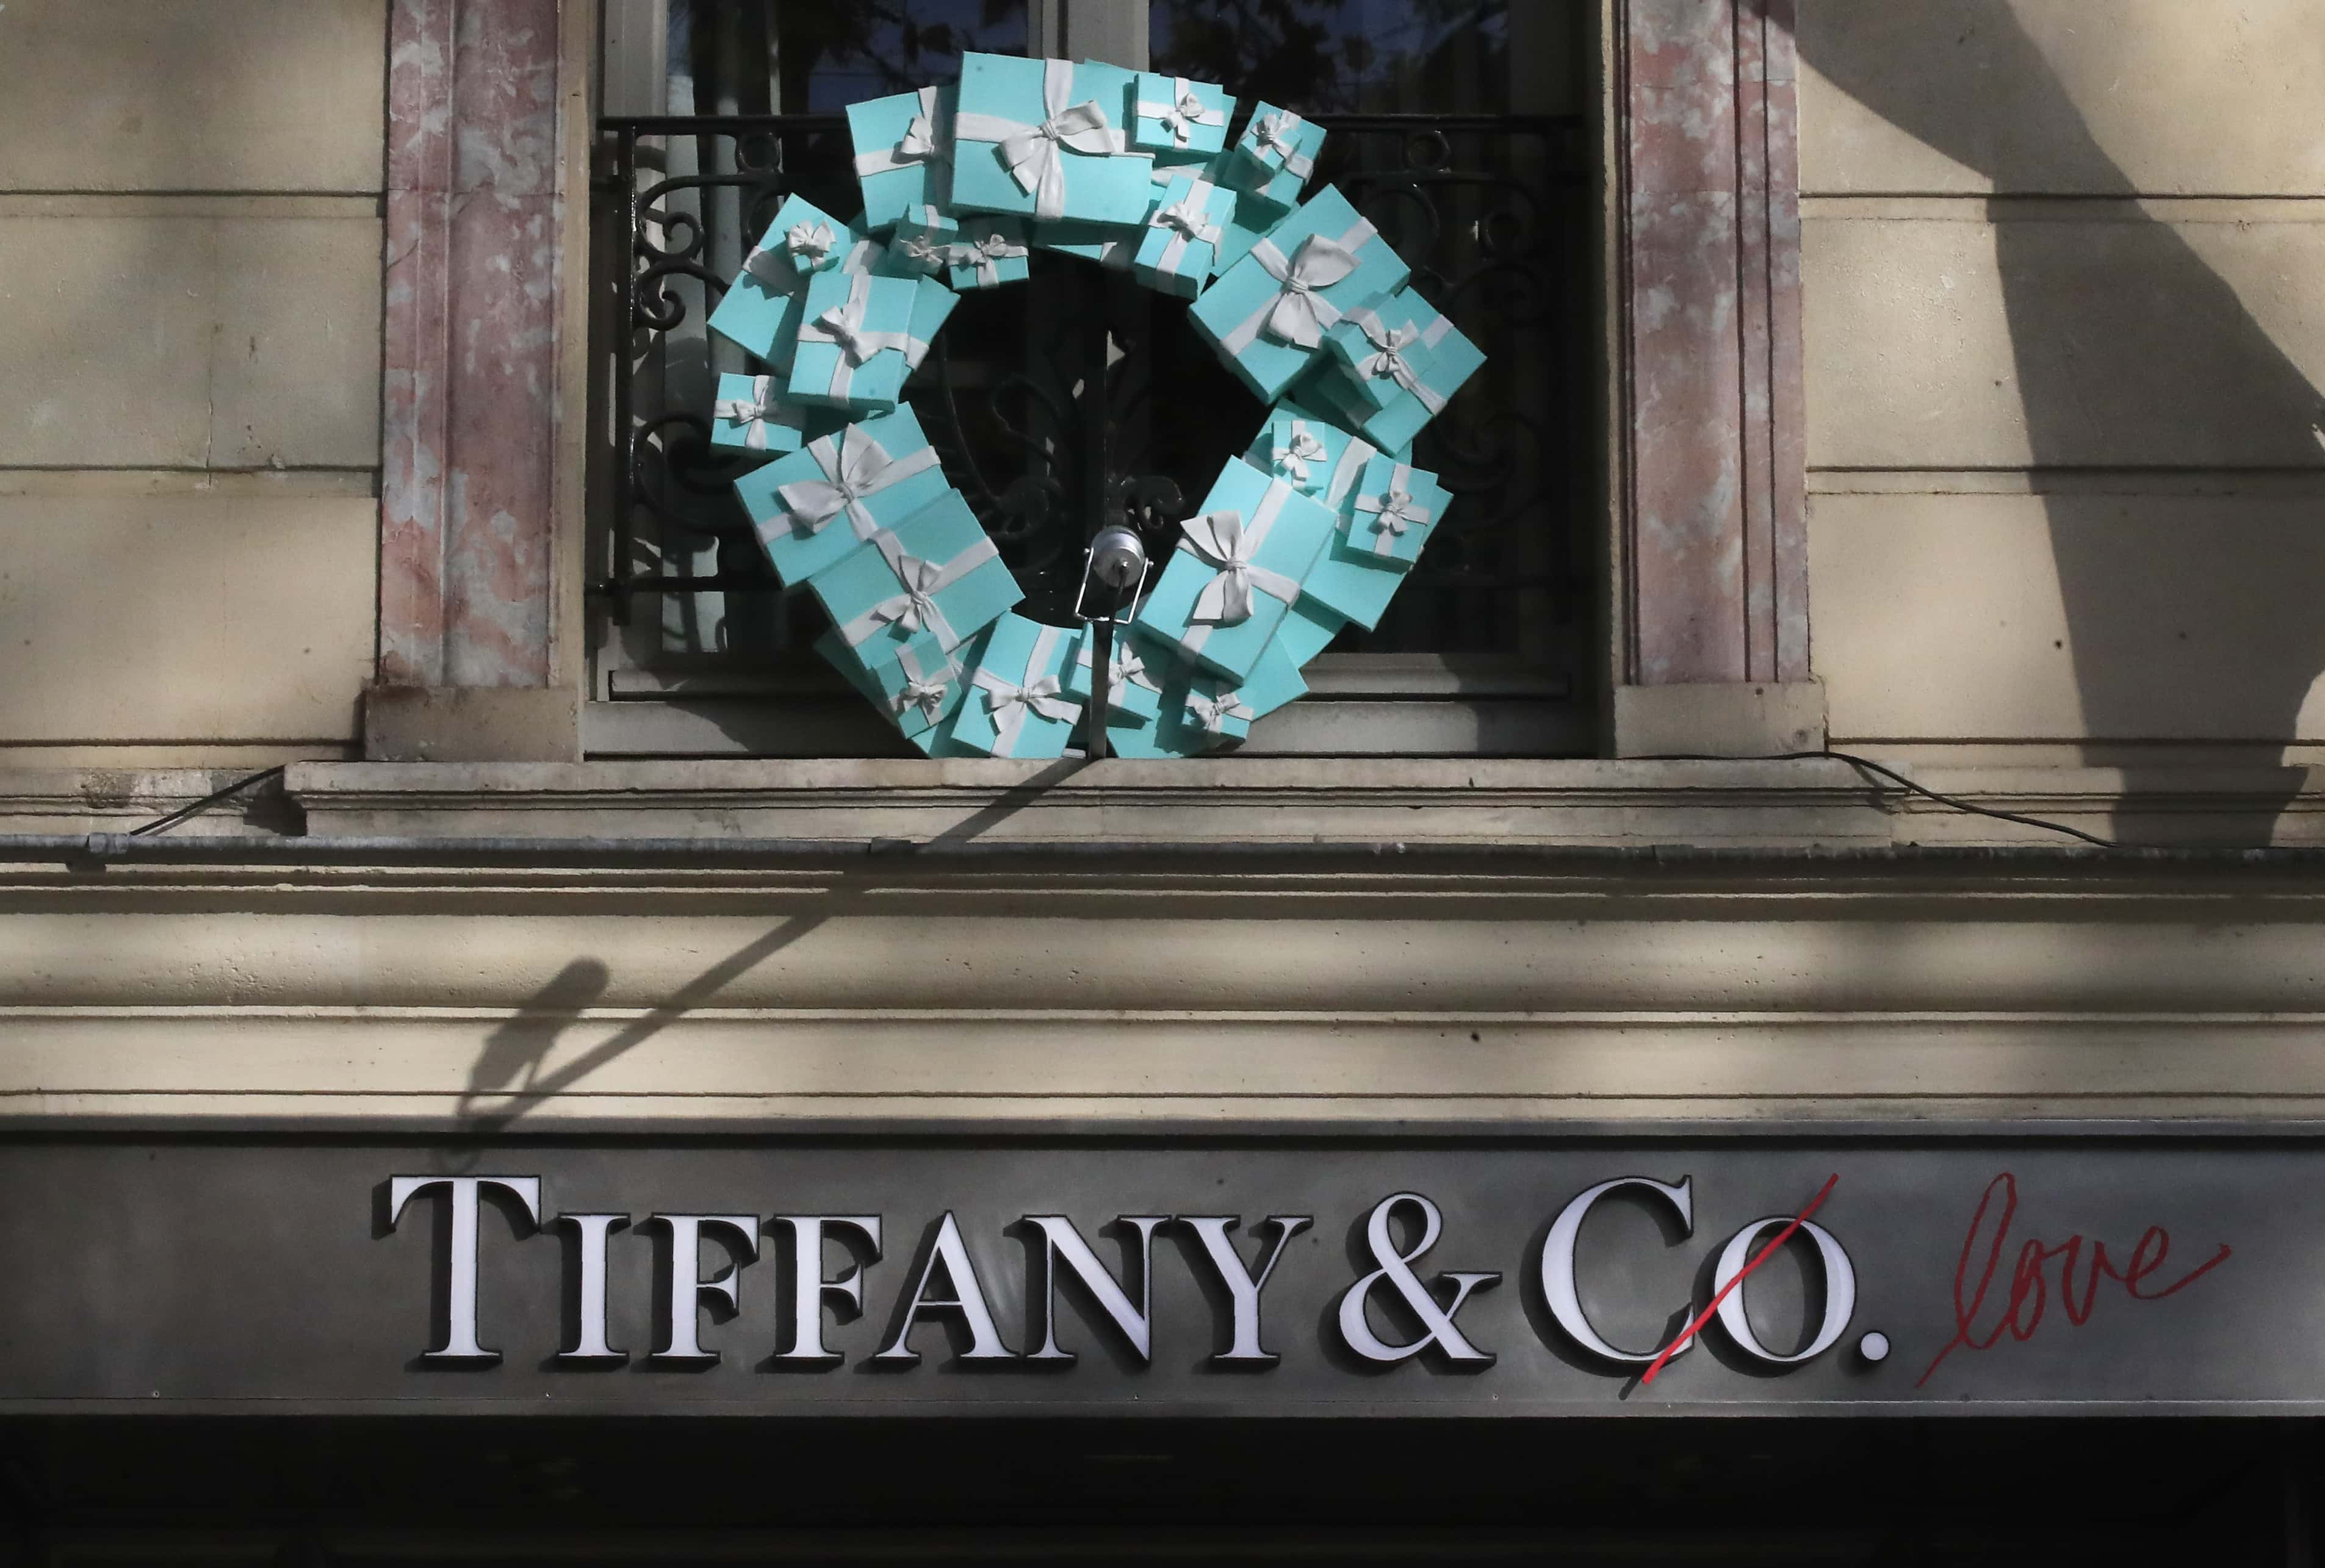 LVMH reaches deal to acquire Tiffany for $16.3 billion